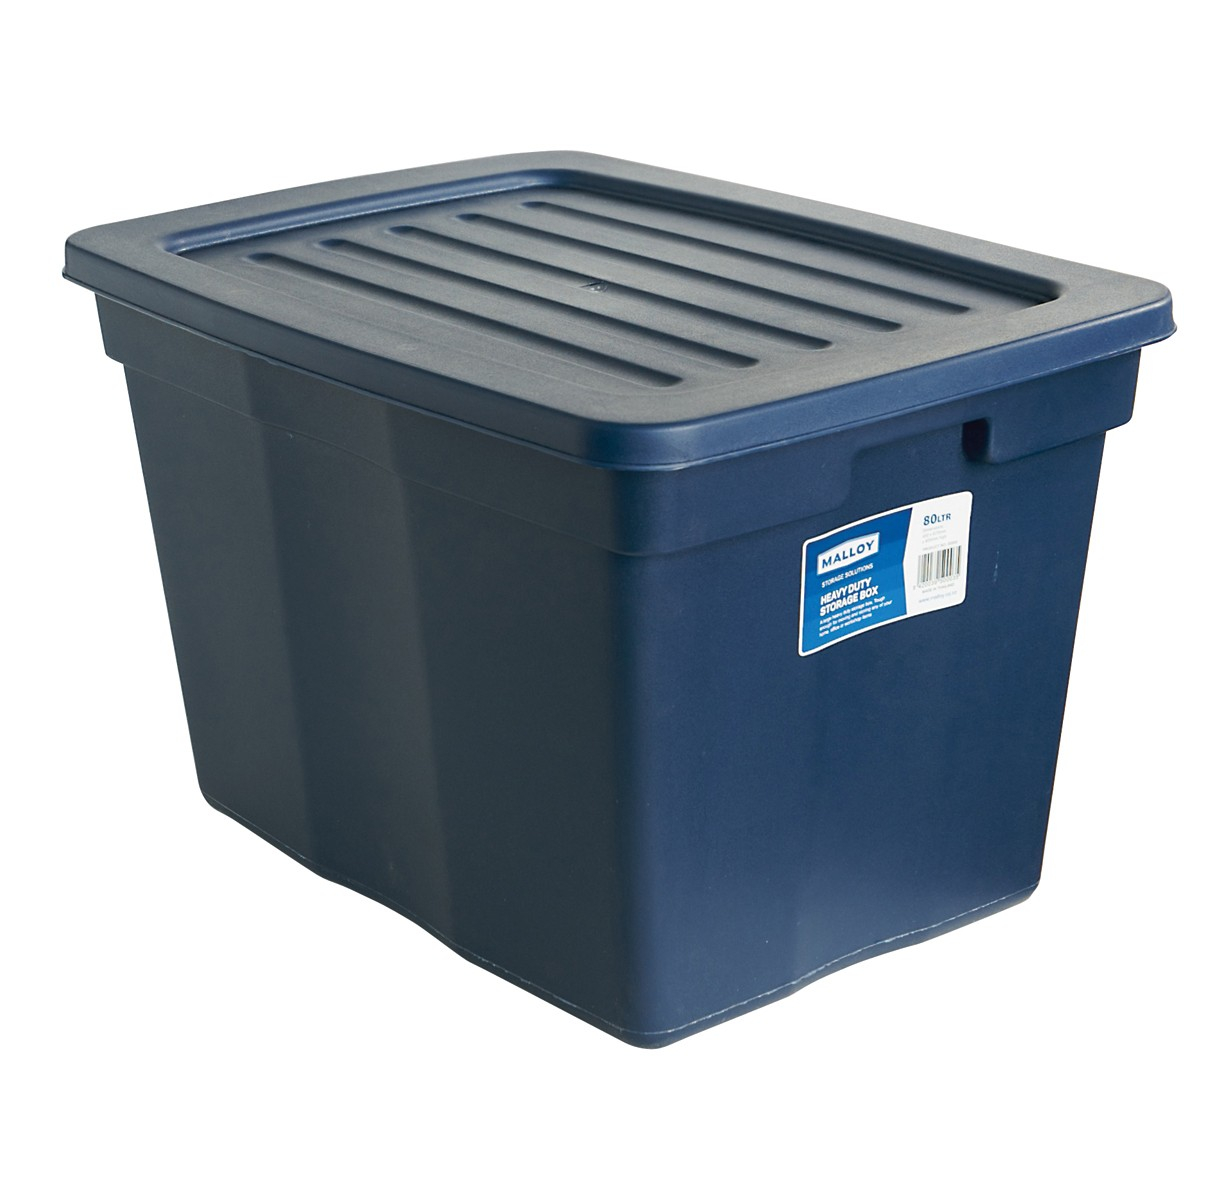 Malloy Storage Box 79l With Lid From Storage Box intended for dimensions 1231 X 1181